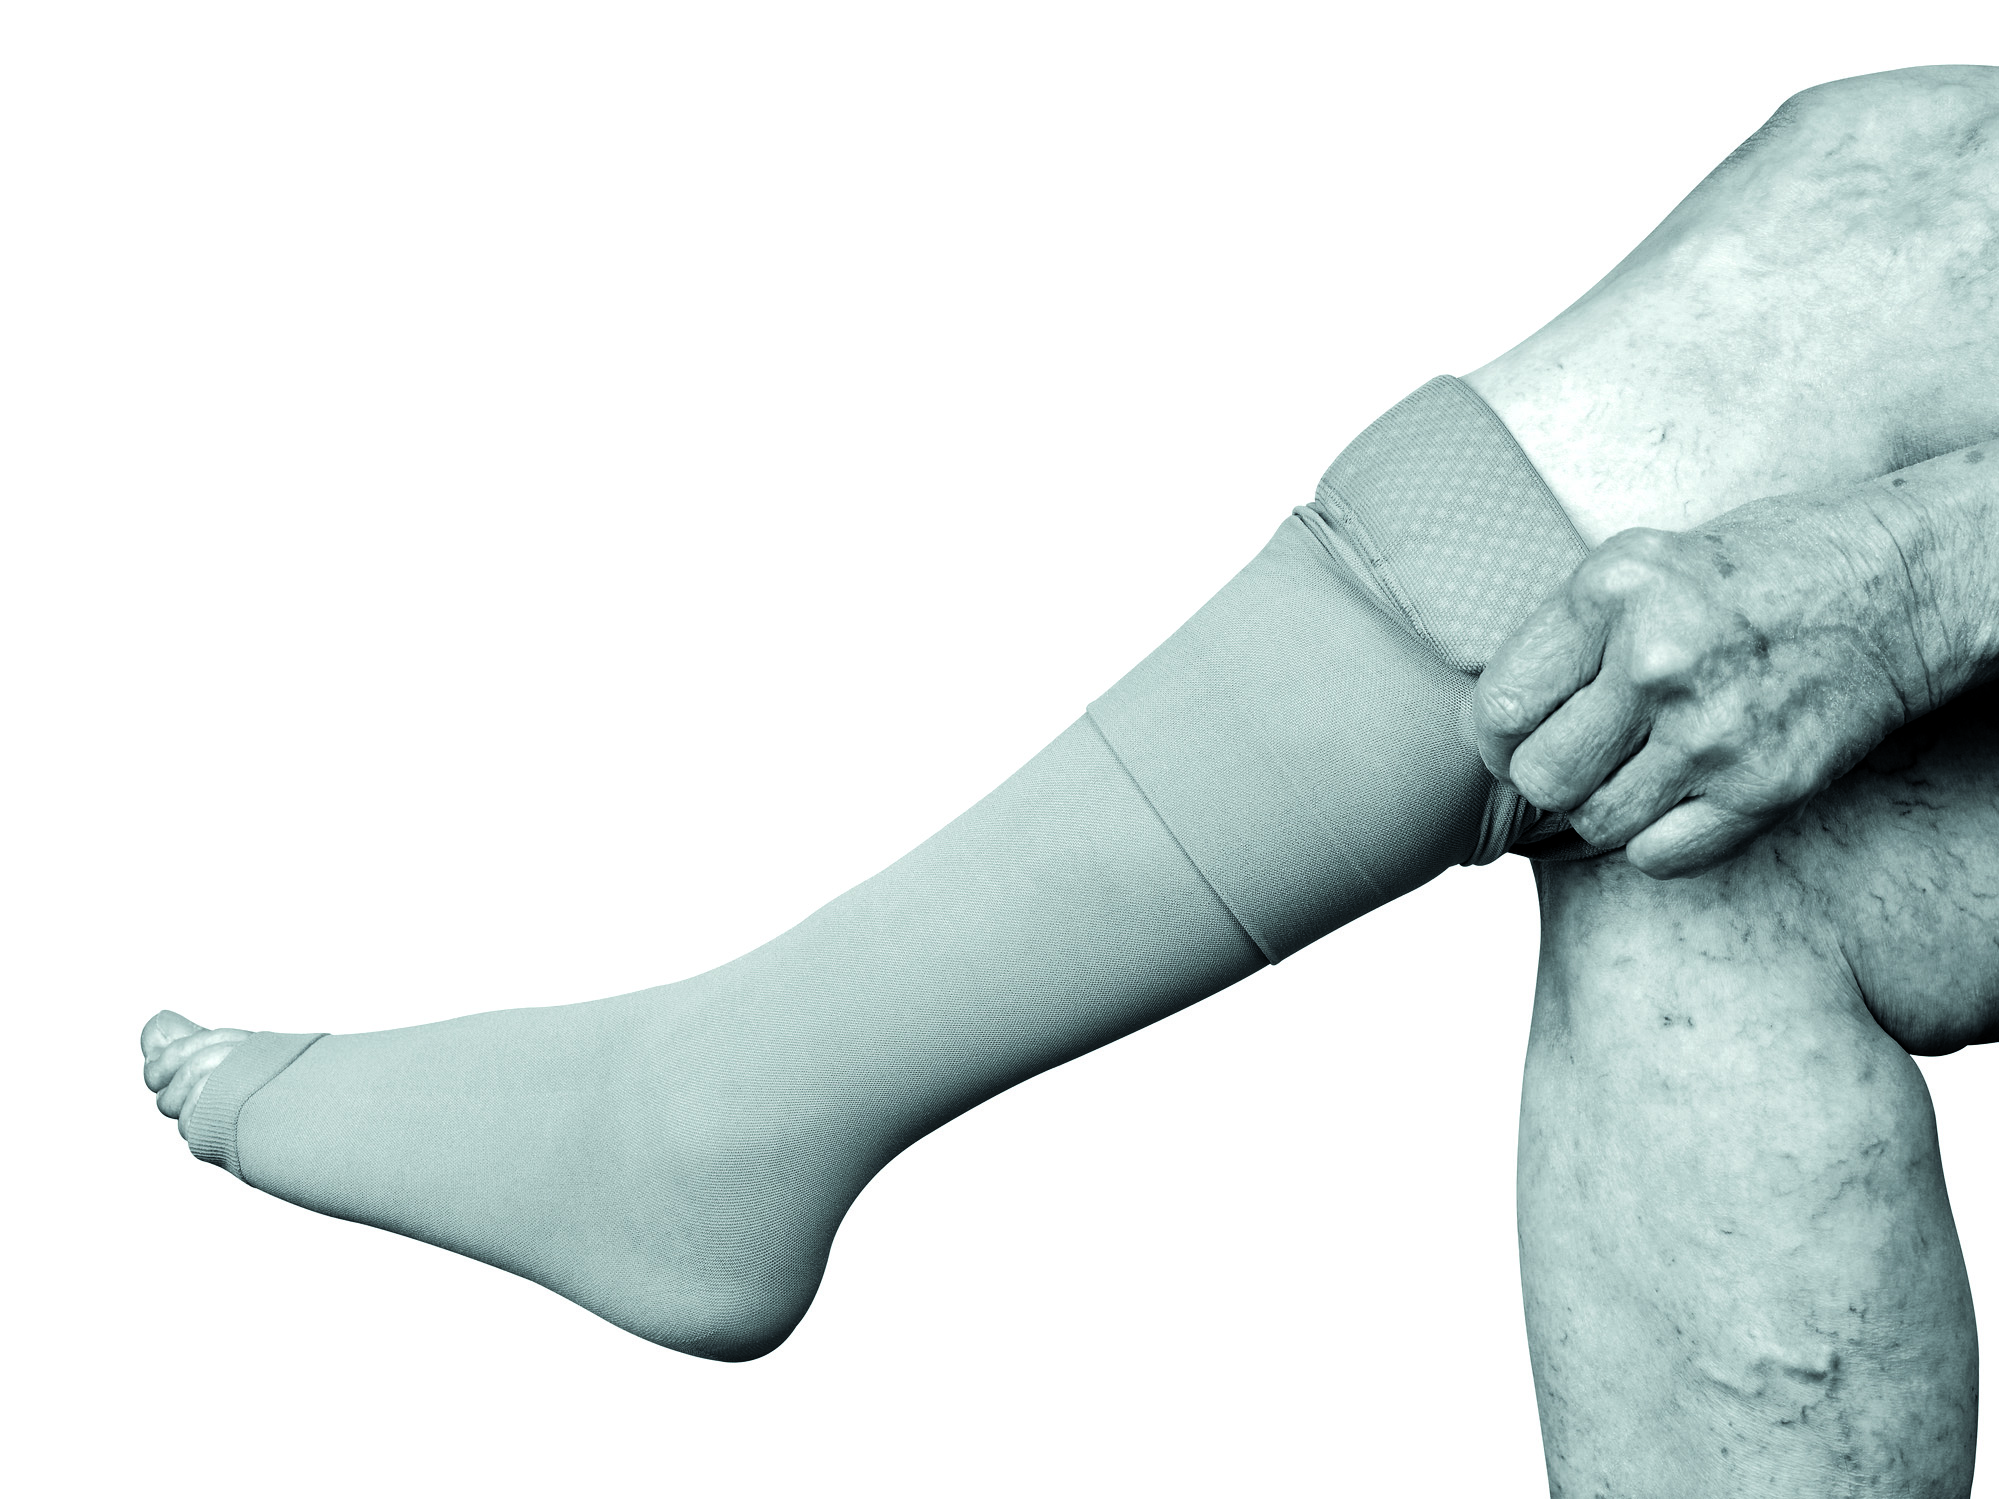 Compression stockings might not be needed to prevent blood clots after  surgery